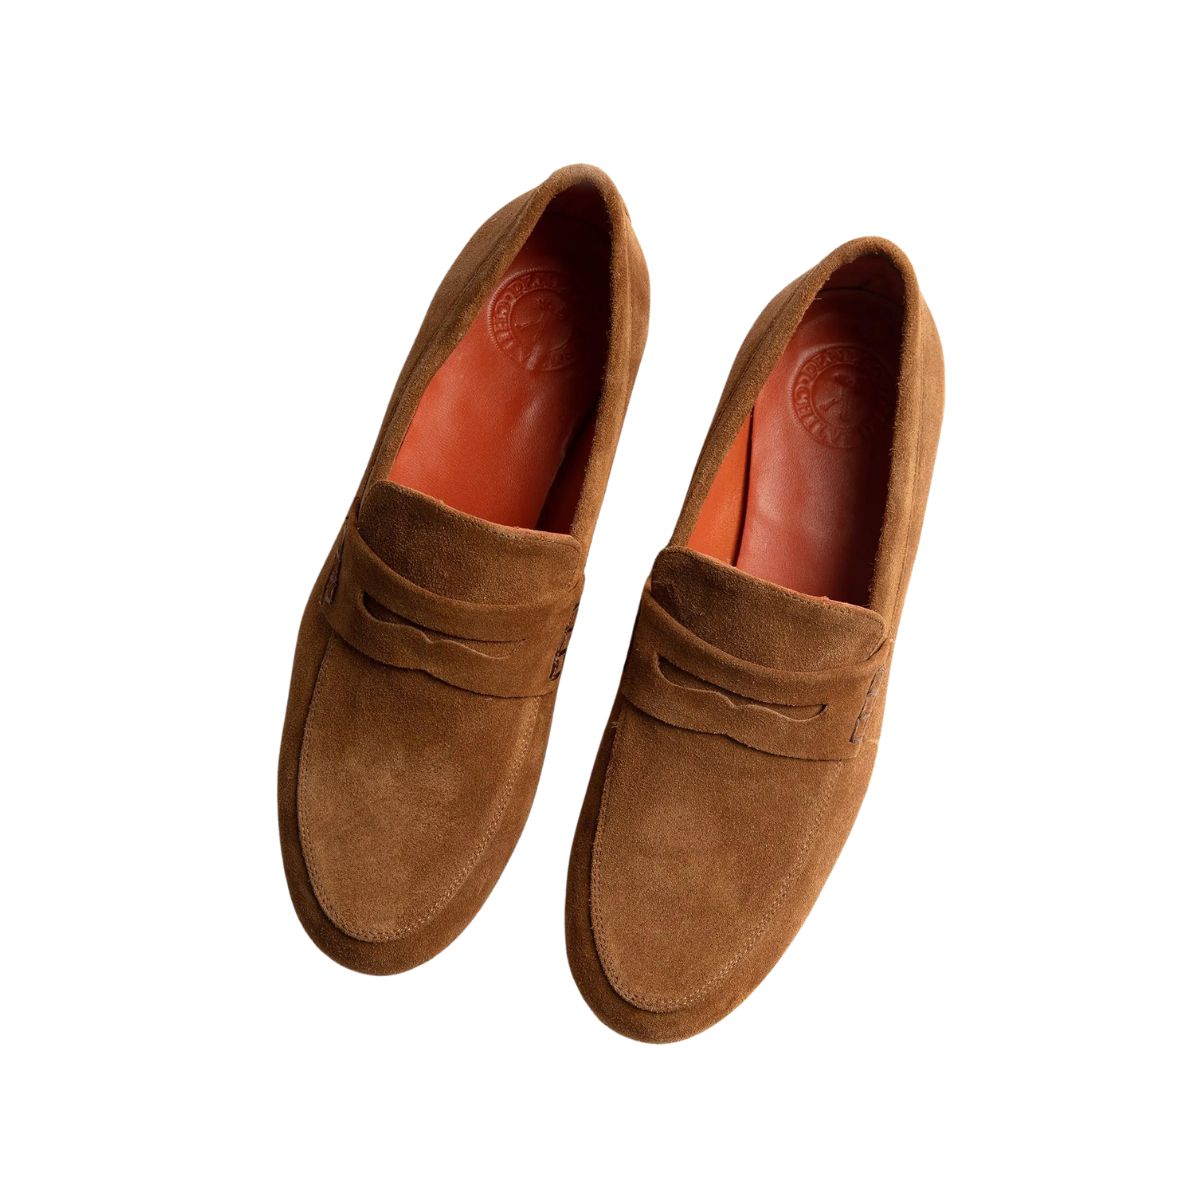 Penelope Chilvers Bonnie Suede Loafer in Tan